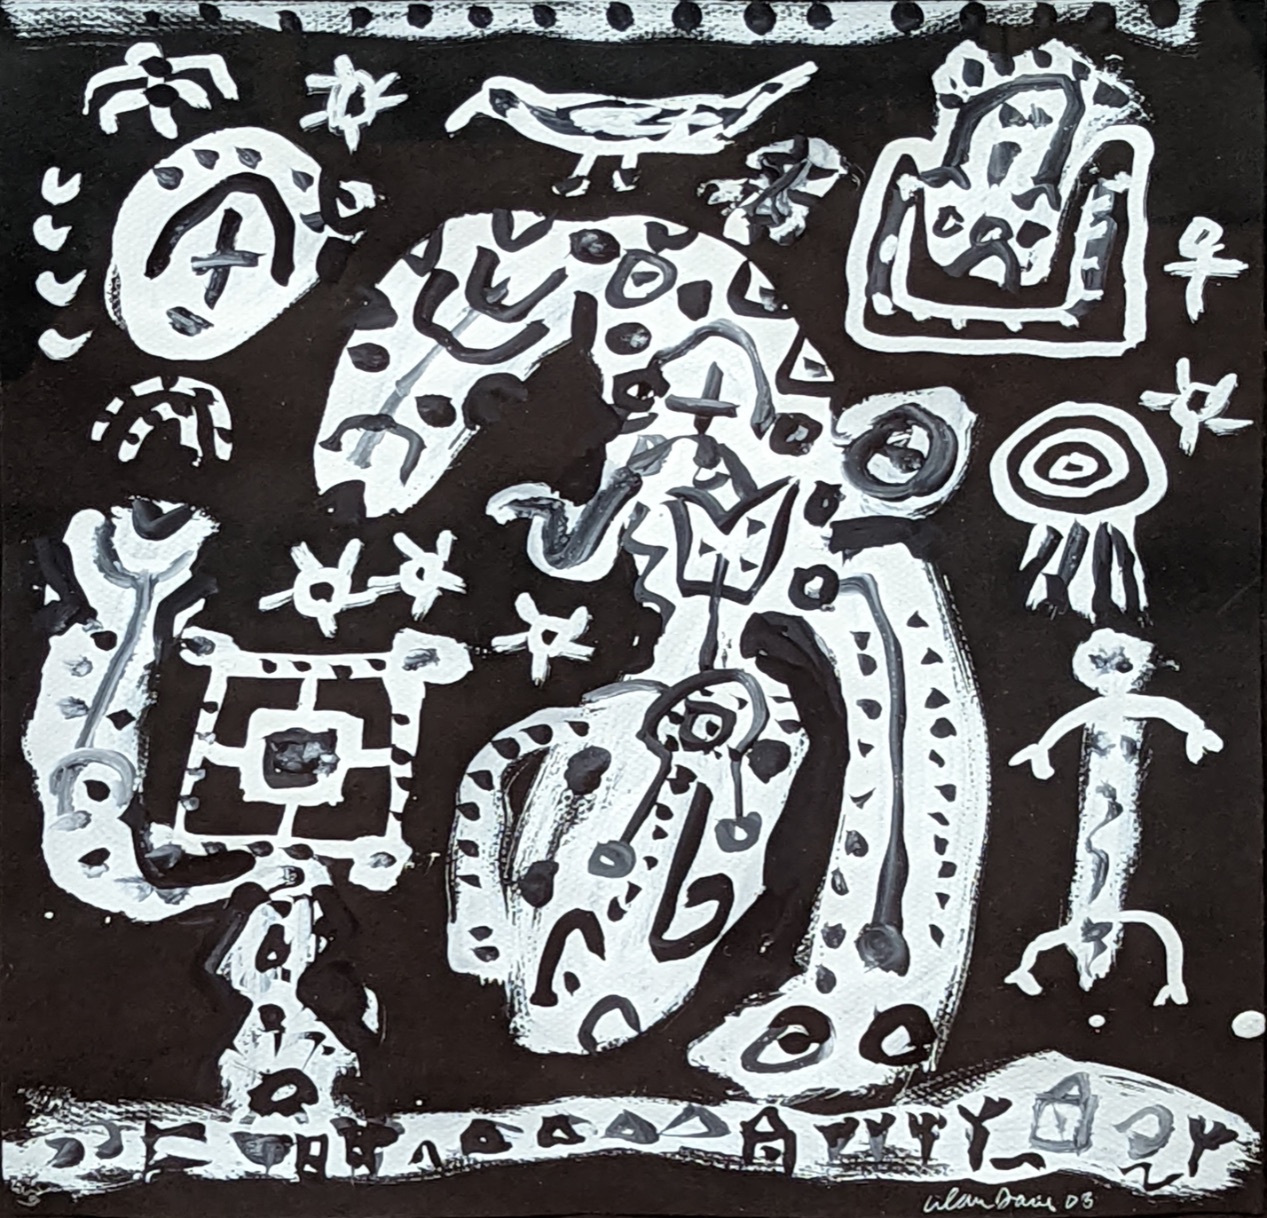 Alan Davie (1920-2014), Bird's Puzzle for a Monkey, 2003, white gouache on black paper, signed and